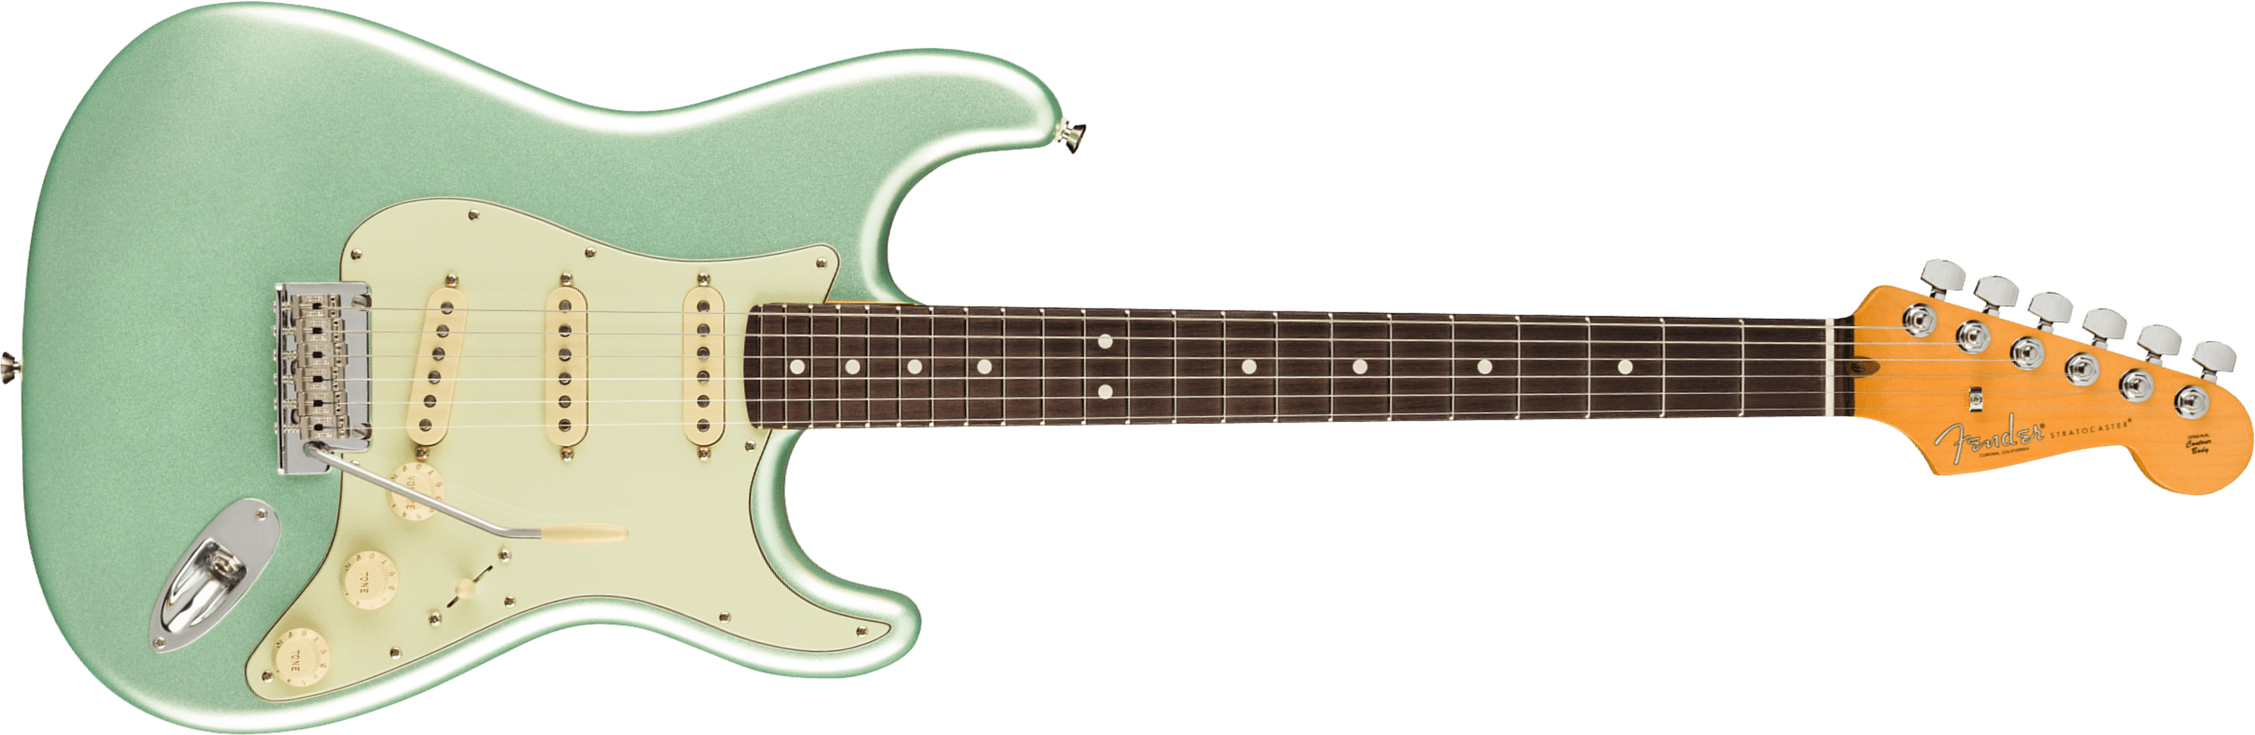 Fender Strat American Professional Ii Usa Rw - Mystic Surf Green - Guitare Électrique Forme Str - Main picture